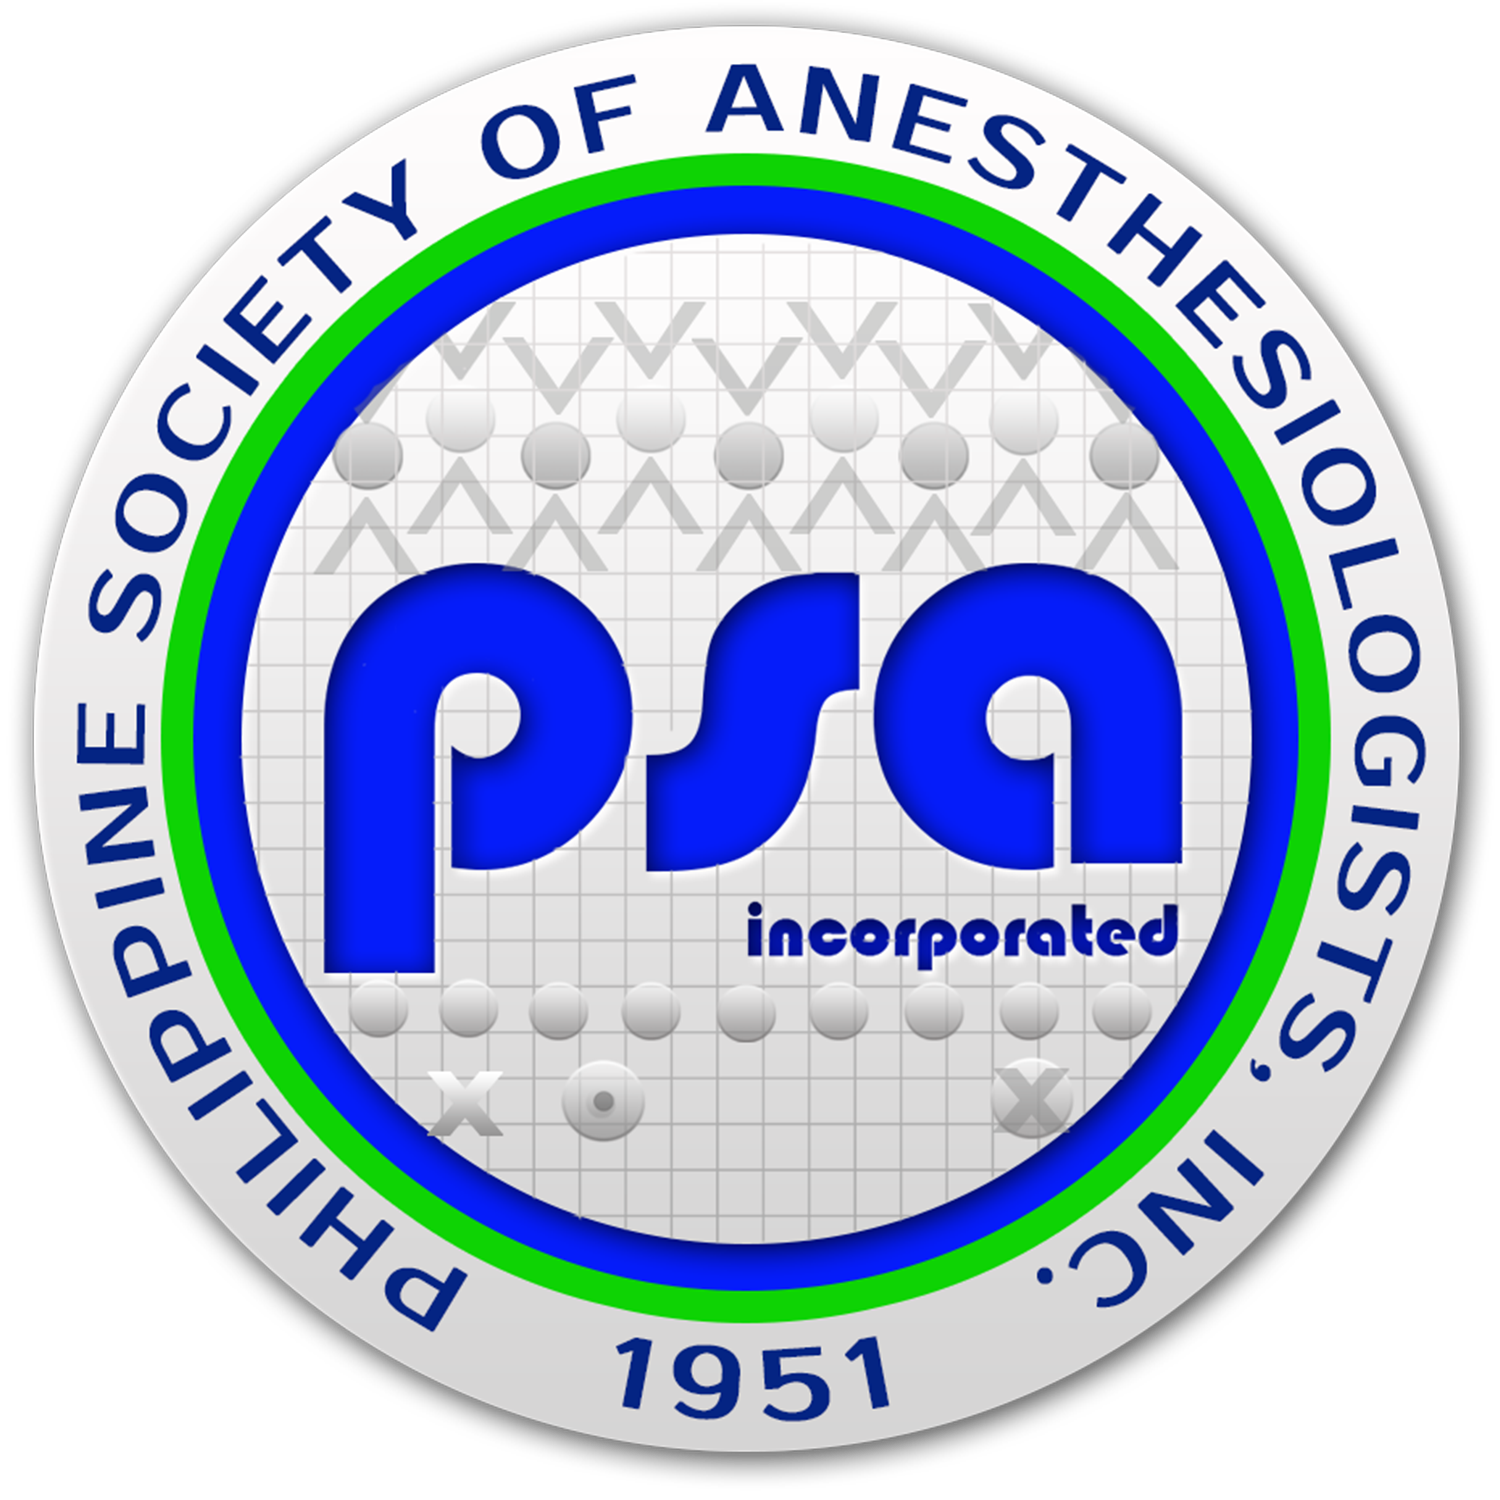 To promote and maintain a community of responsible anesthesiologists ...